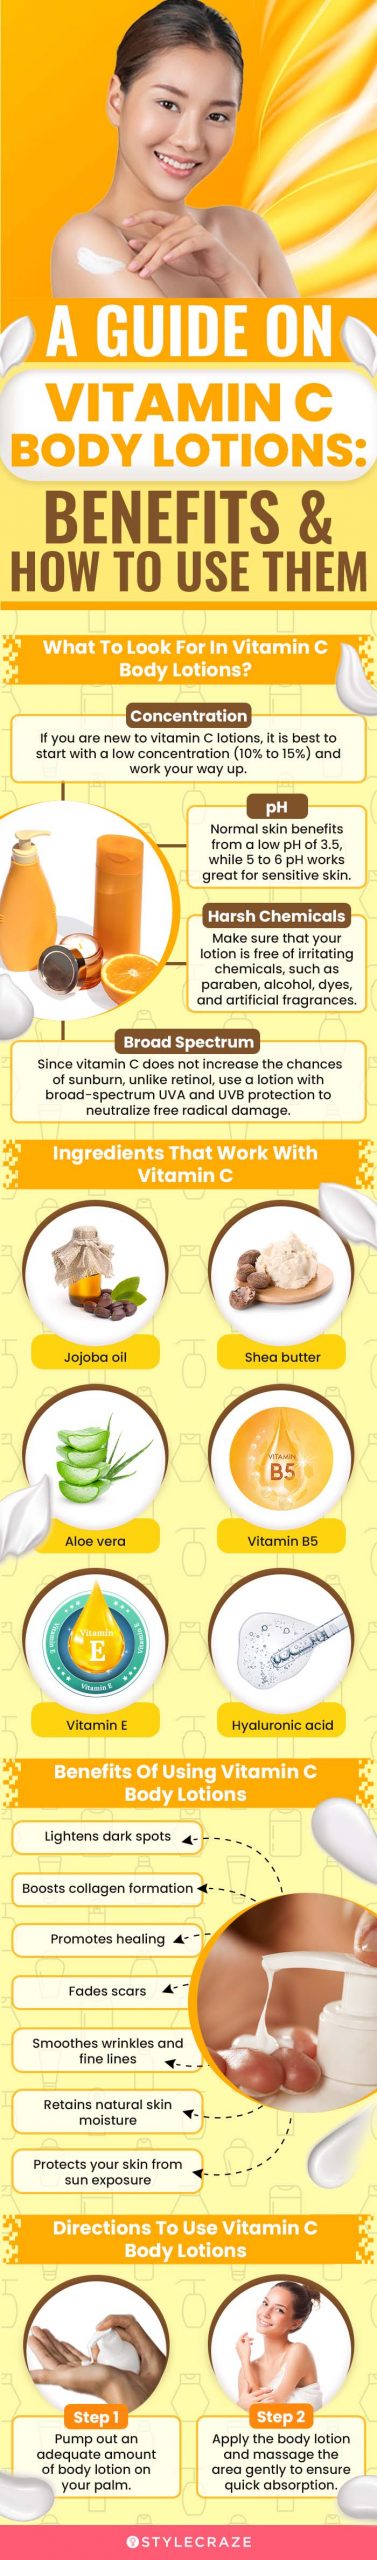 A Guide On Vitamin C Body Body Lotions: Benefits & How To Use Them (infographic)